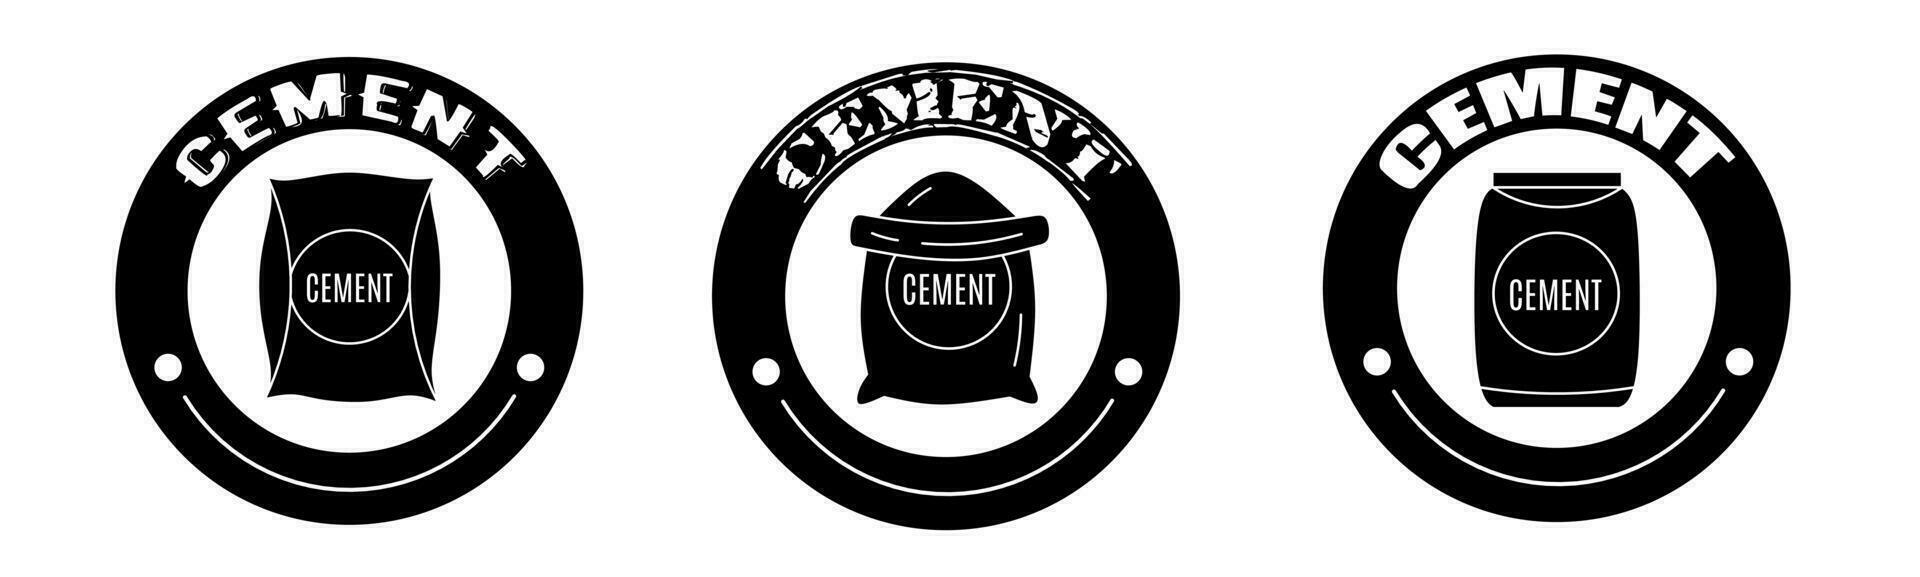 Cement product sale icon vector illustration. Design for shop and sale banner business.